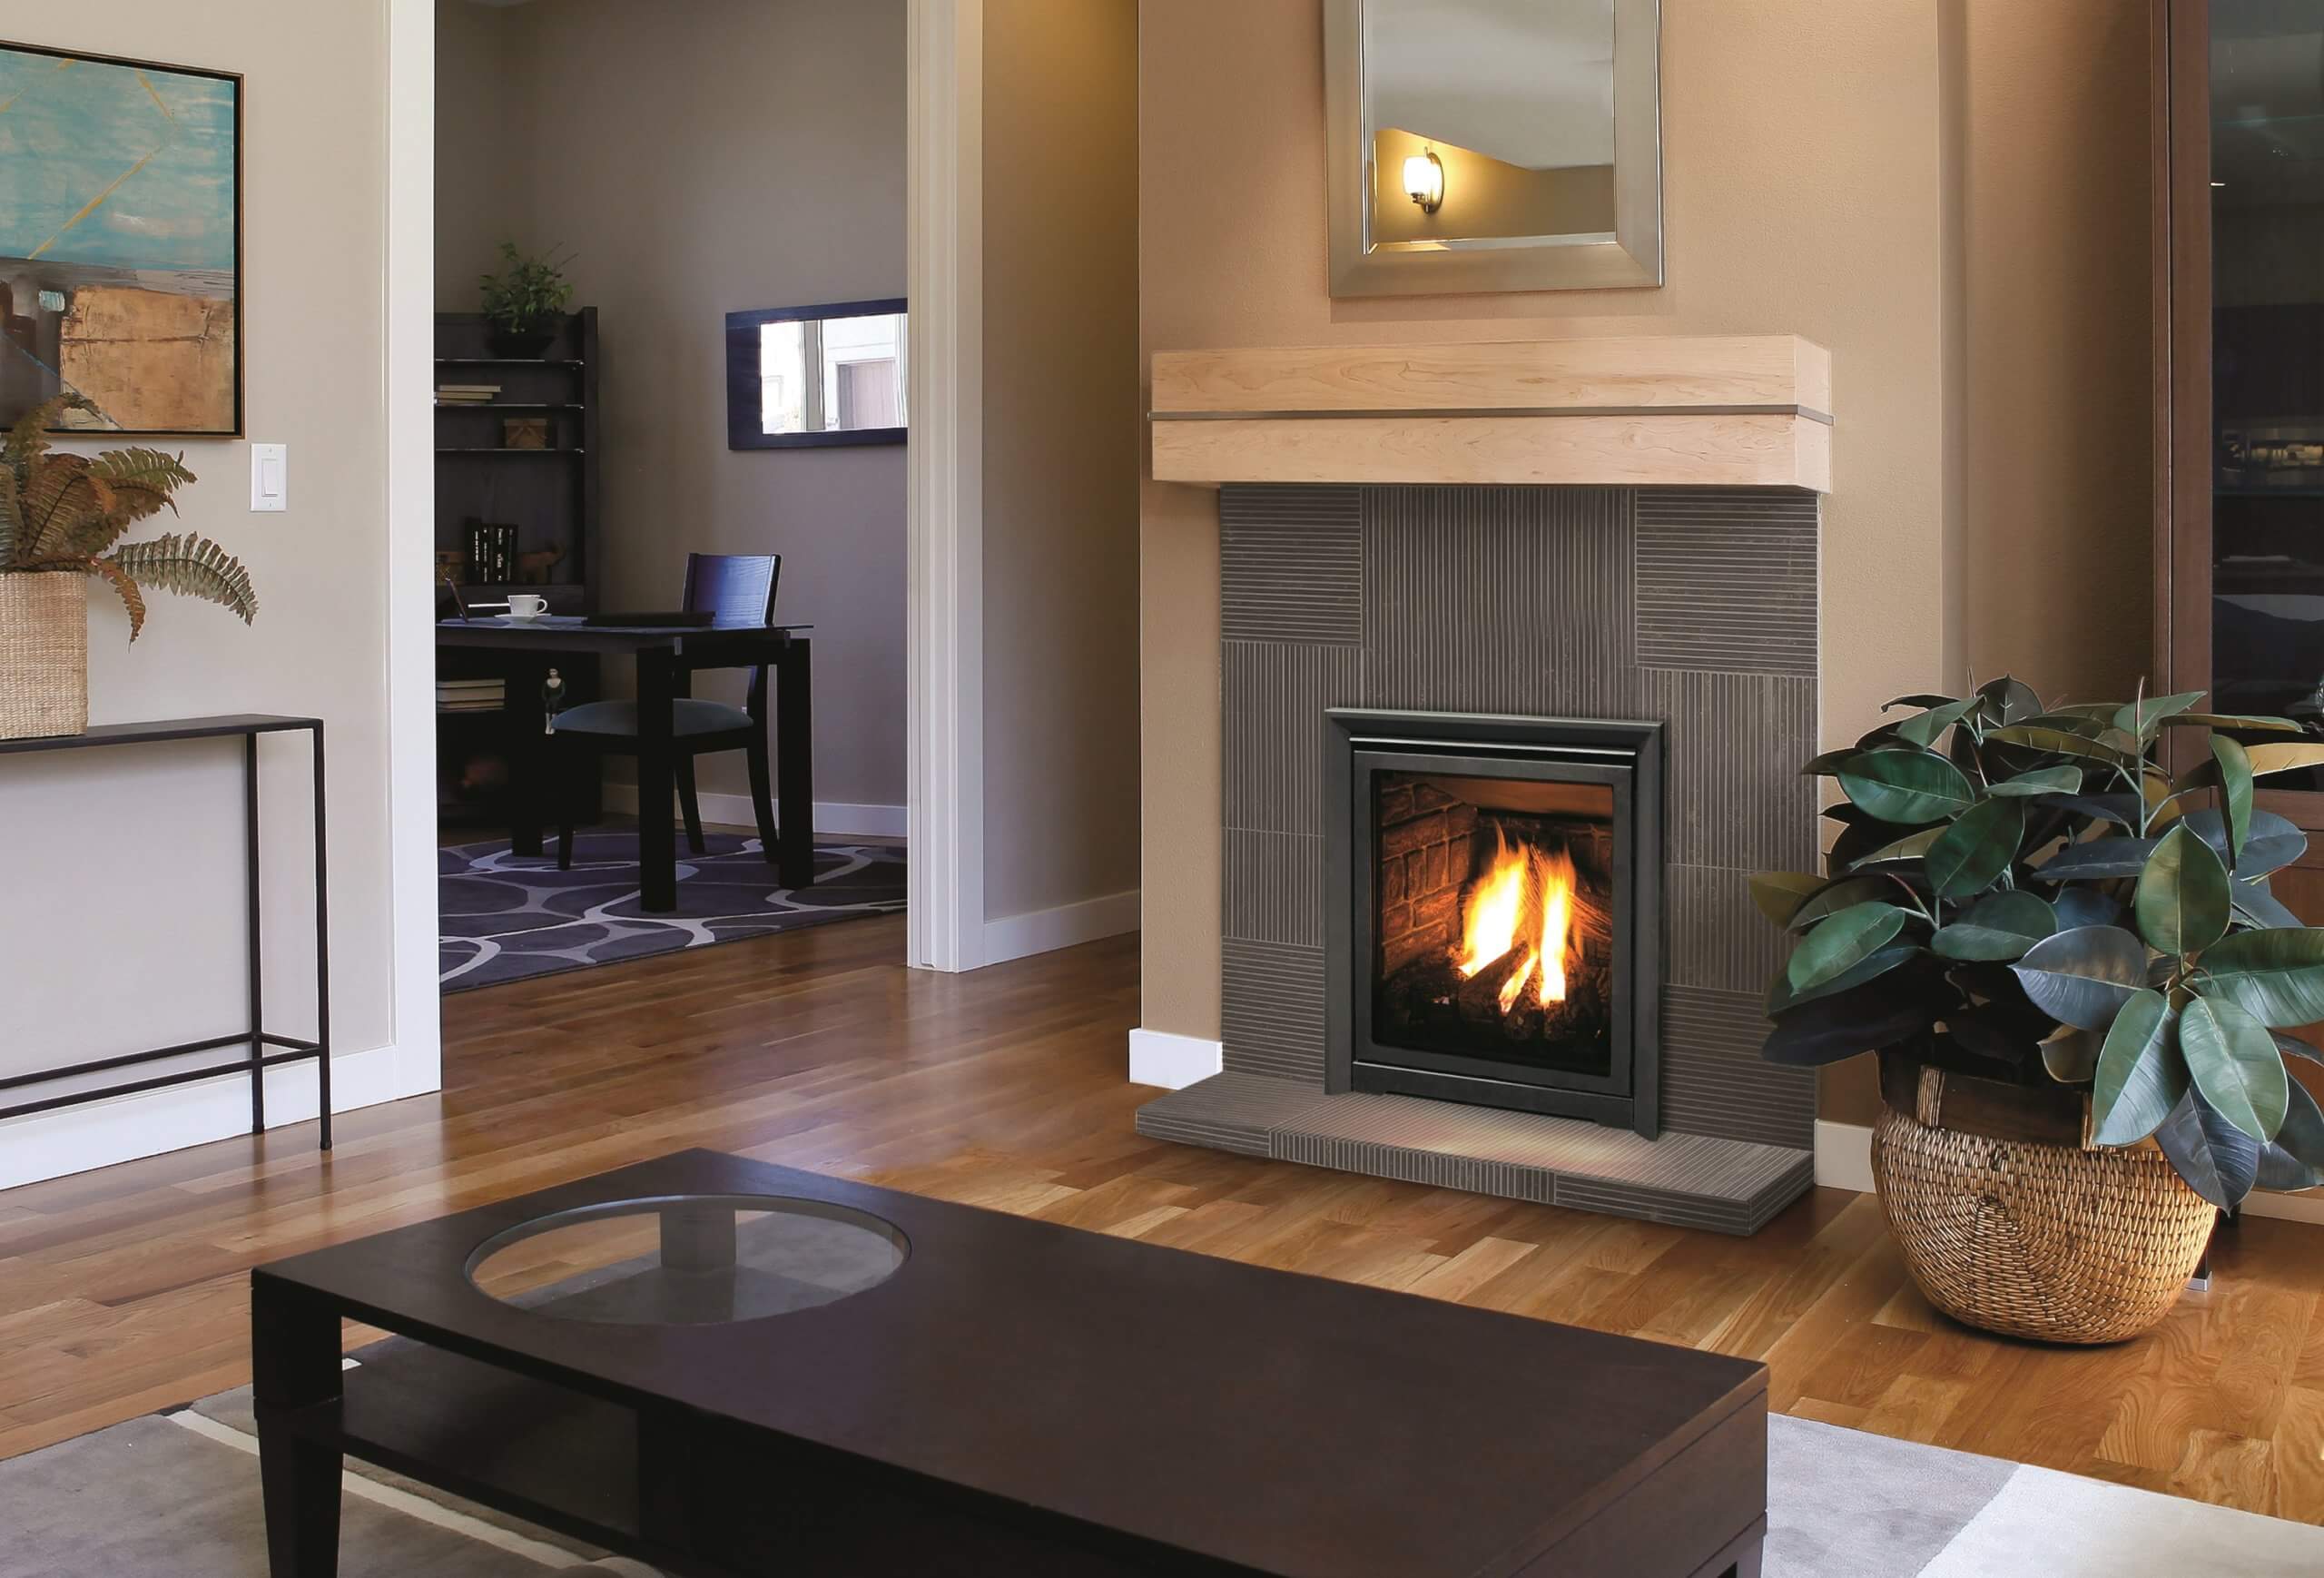 Small Q1 Gas fireplace insert by Enviro next to indoor plant in modern living room